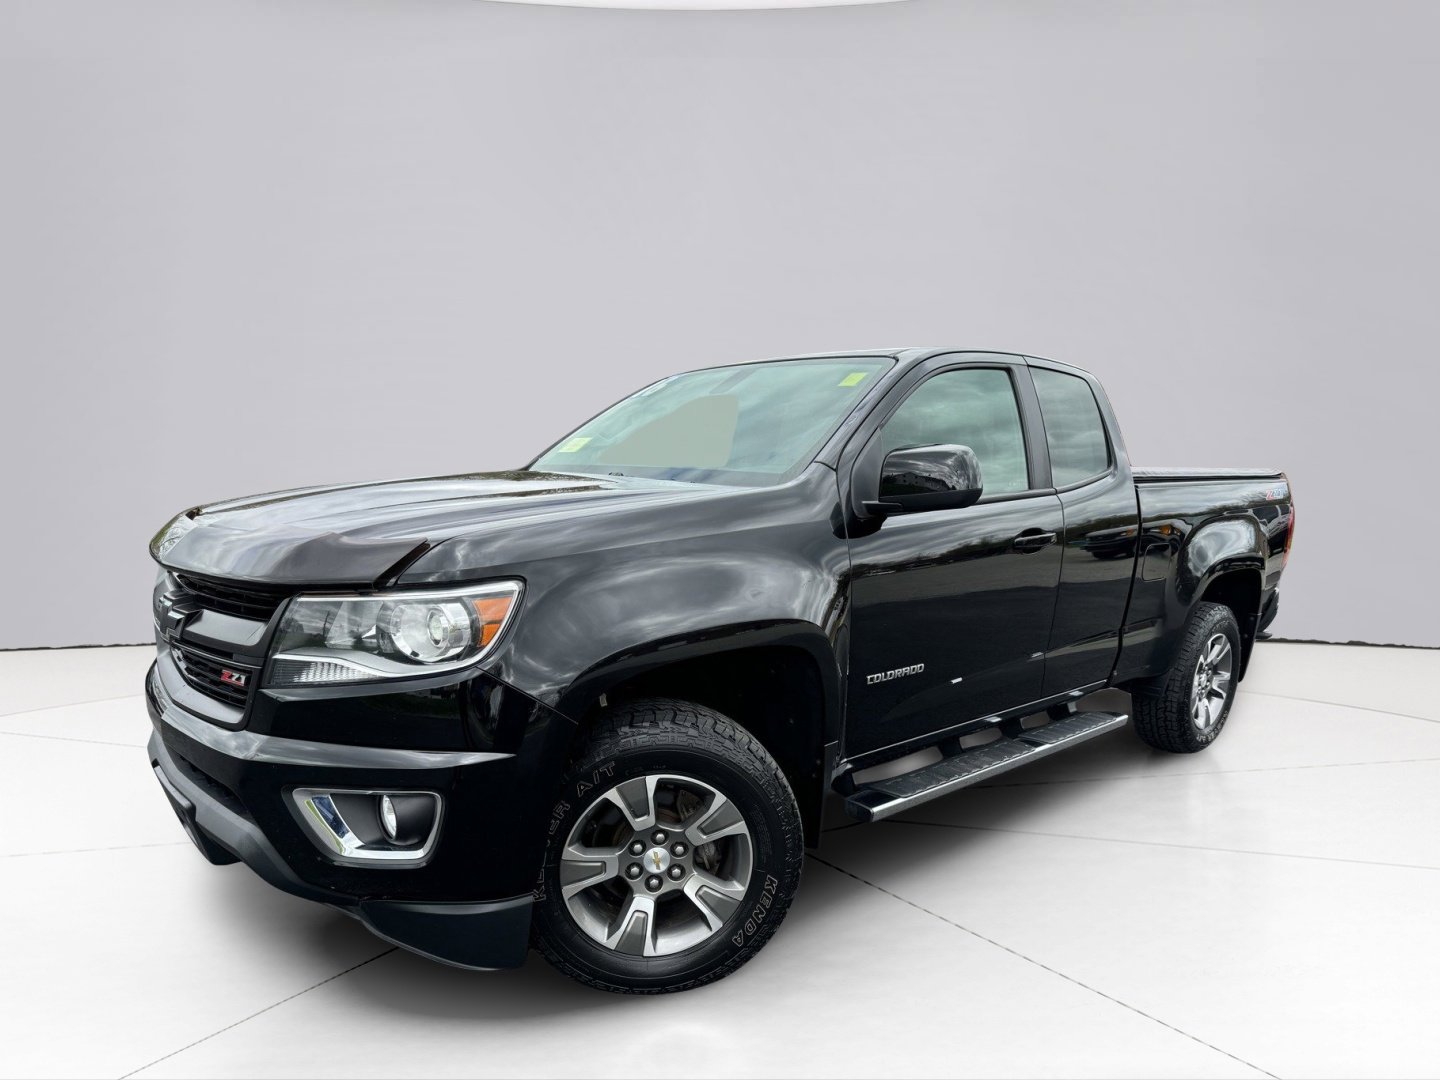 2016 Chevrolet Colorado Vehicle Photo in LEOMINSTER, MA 01453-2952